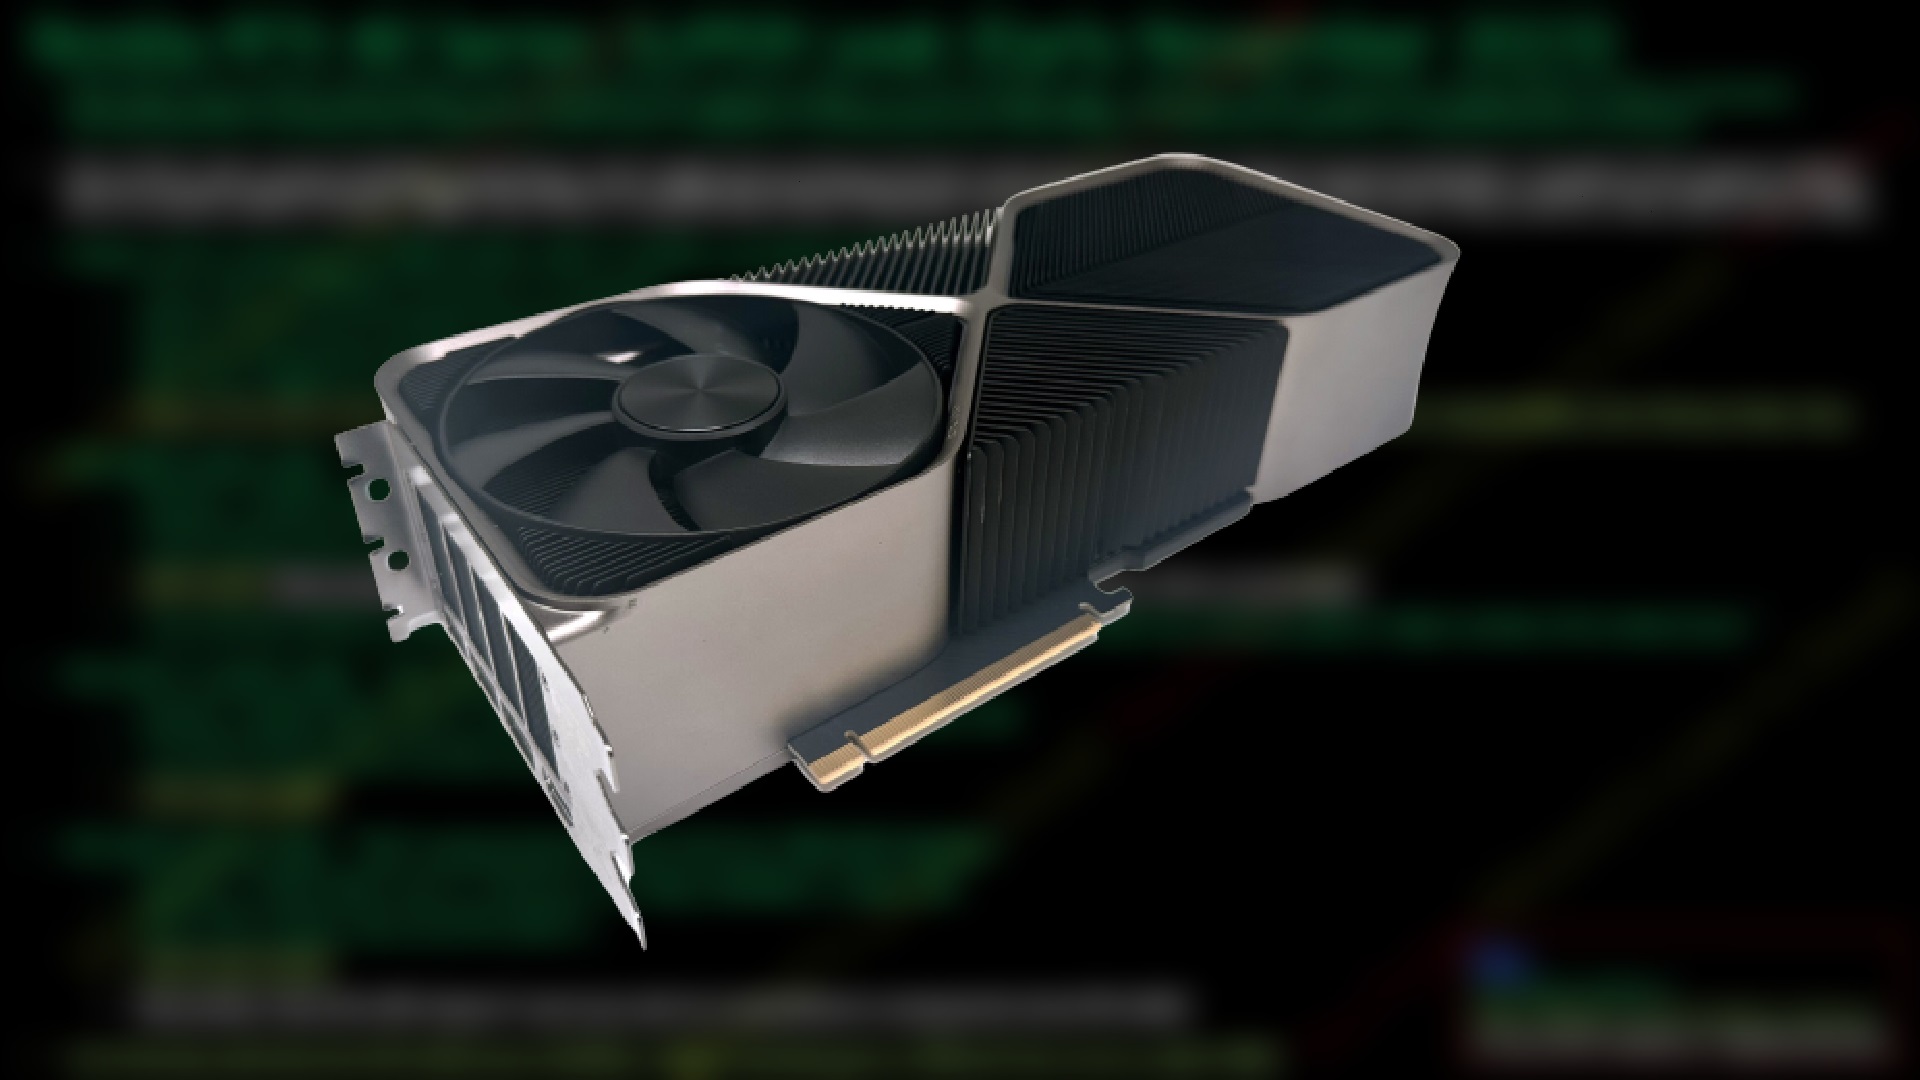 Nvidia RTX 4070 specs: price, performance, size, and release date